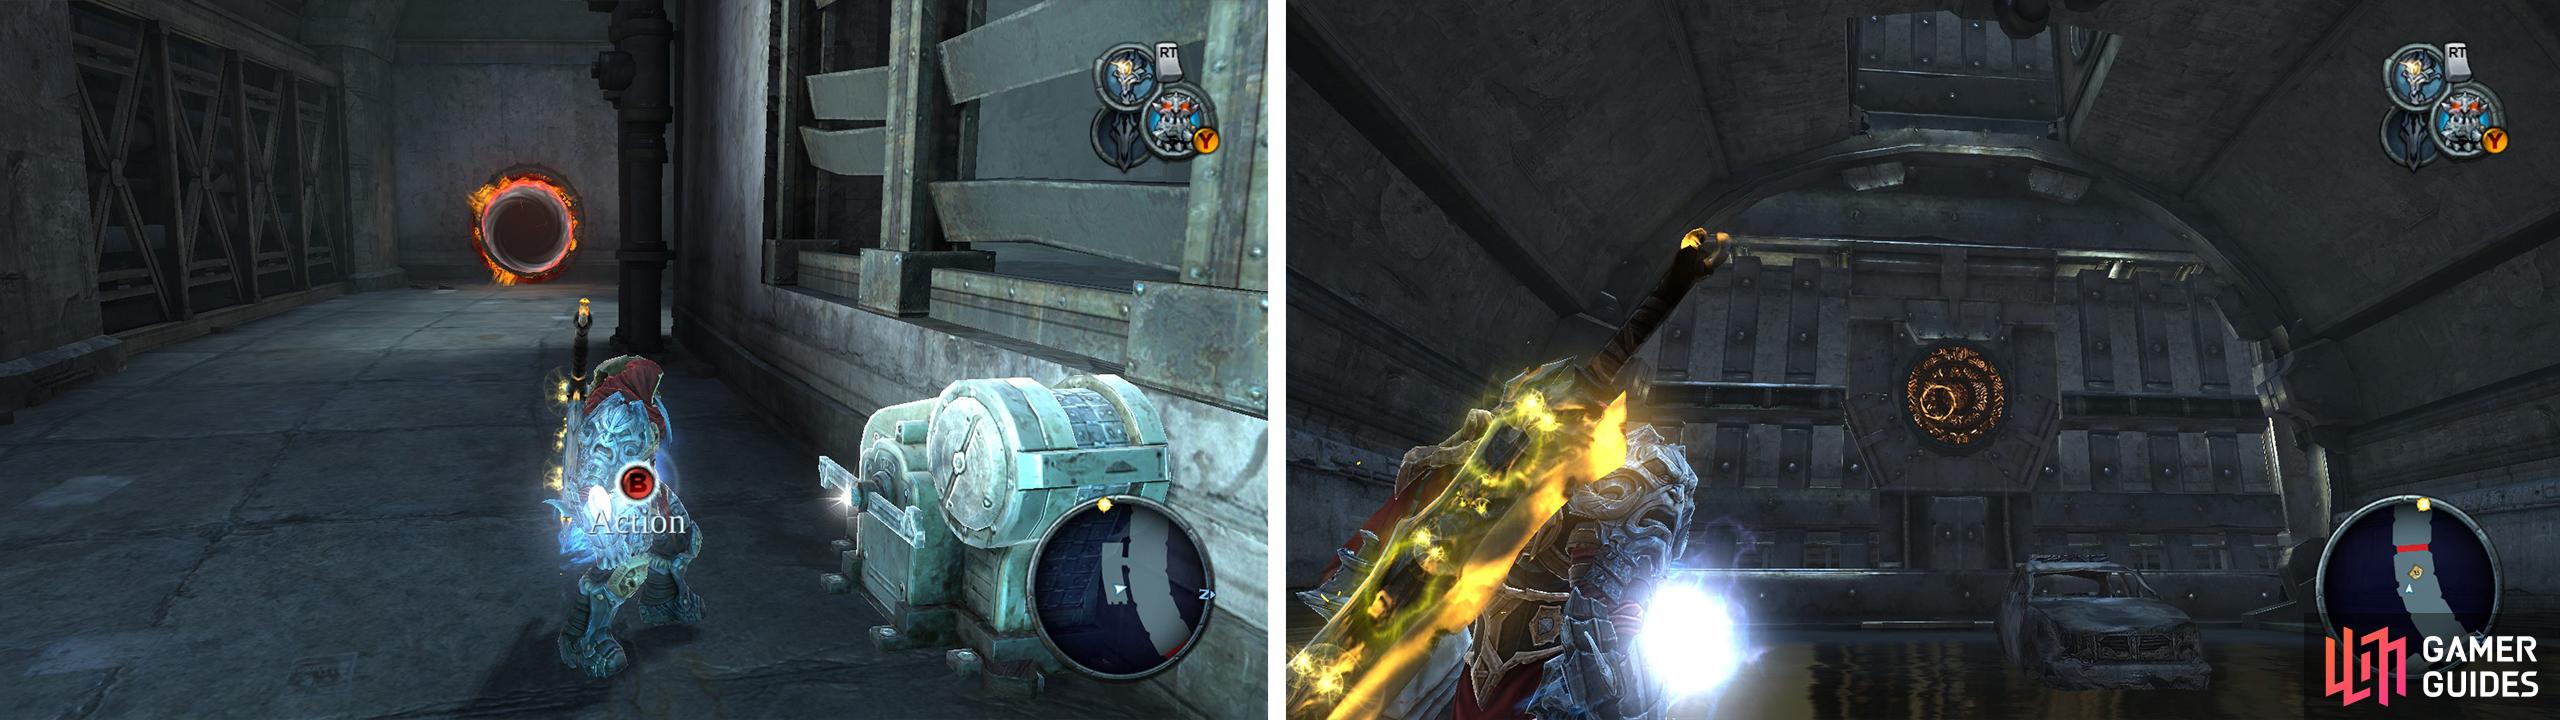 Use the portal pad in the room with the Chronosphere (left) and the other on the back of the door the switch opens (right). Raise the door and run through for the chest.